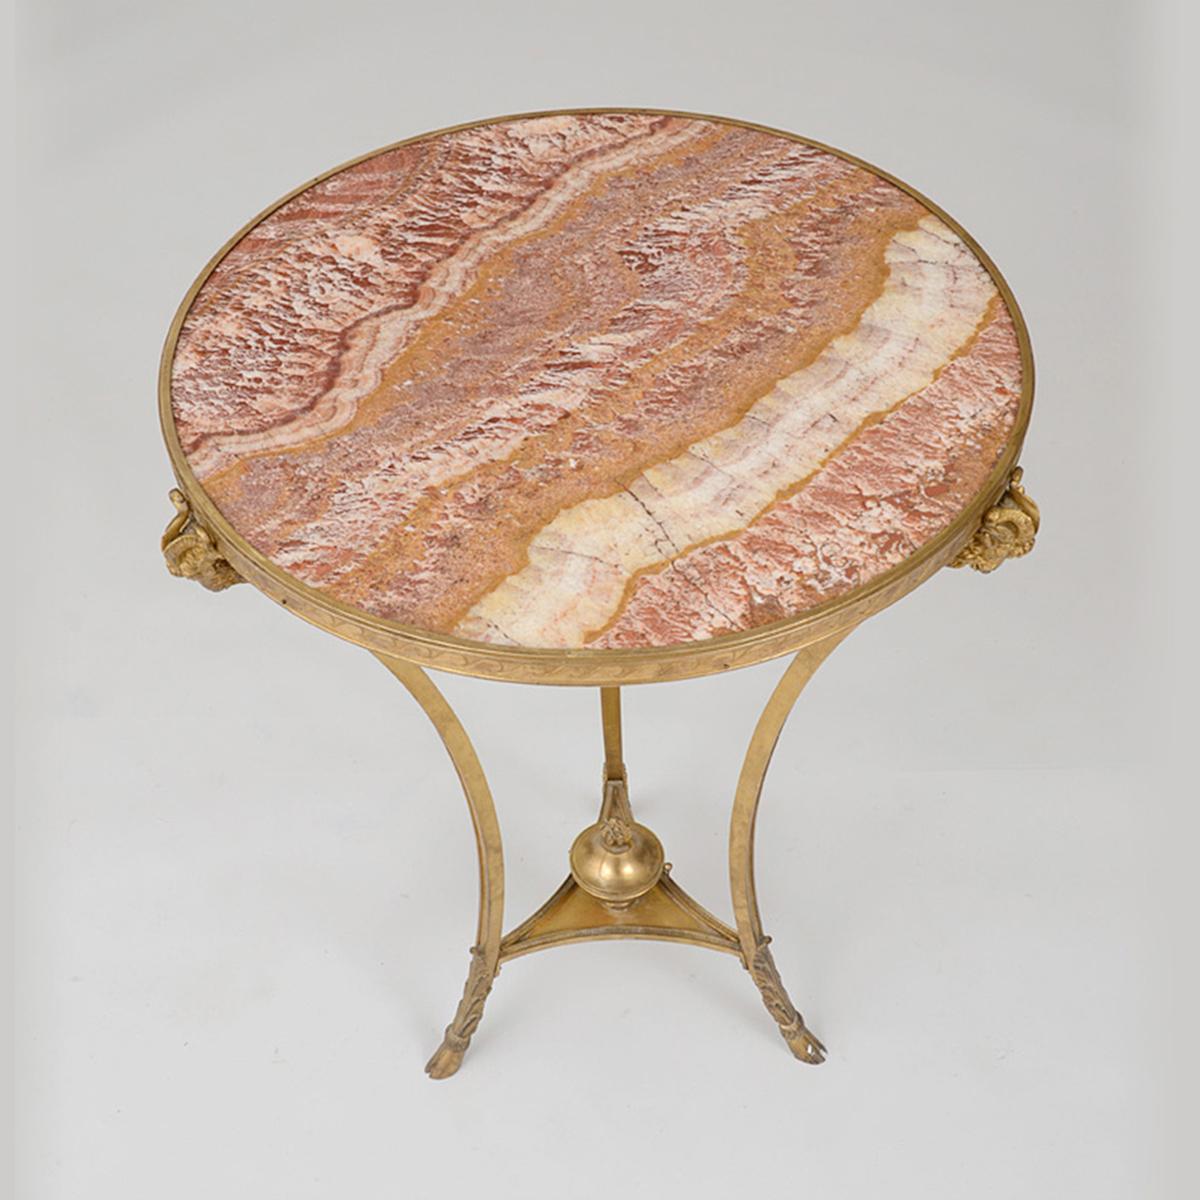 A fine quality Louis XVI style gilt bronze and marble-top Guéridon.
The circular agate-inset top within a wave border, raised on incurved supports with ram masks, continuing to the tripartite stretcher centered by a flaming urn, ending on hoof